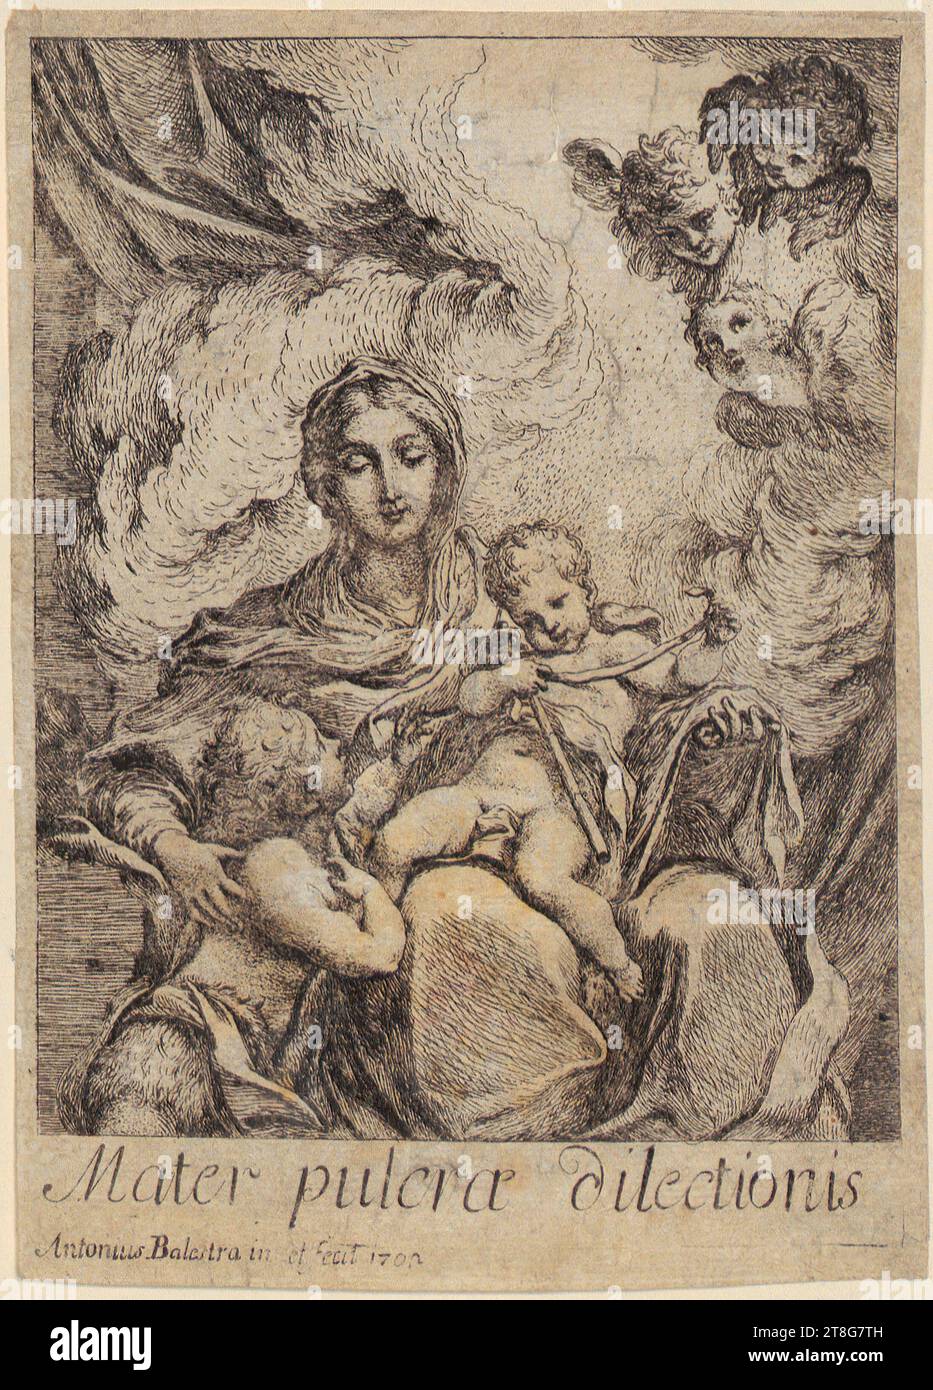 Antonio Balestra (1666 - 1740), Madonna with Child and Boy St. John, print medium: 1702, etching, sheet size: 15.6 x 11.2 cm, inscribed at the bottom from left to right 'Mater pulcra dilectionis' and signed and dated at the bottom left 'Dilectus meus mihi etgo illi Stock Photo